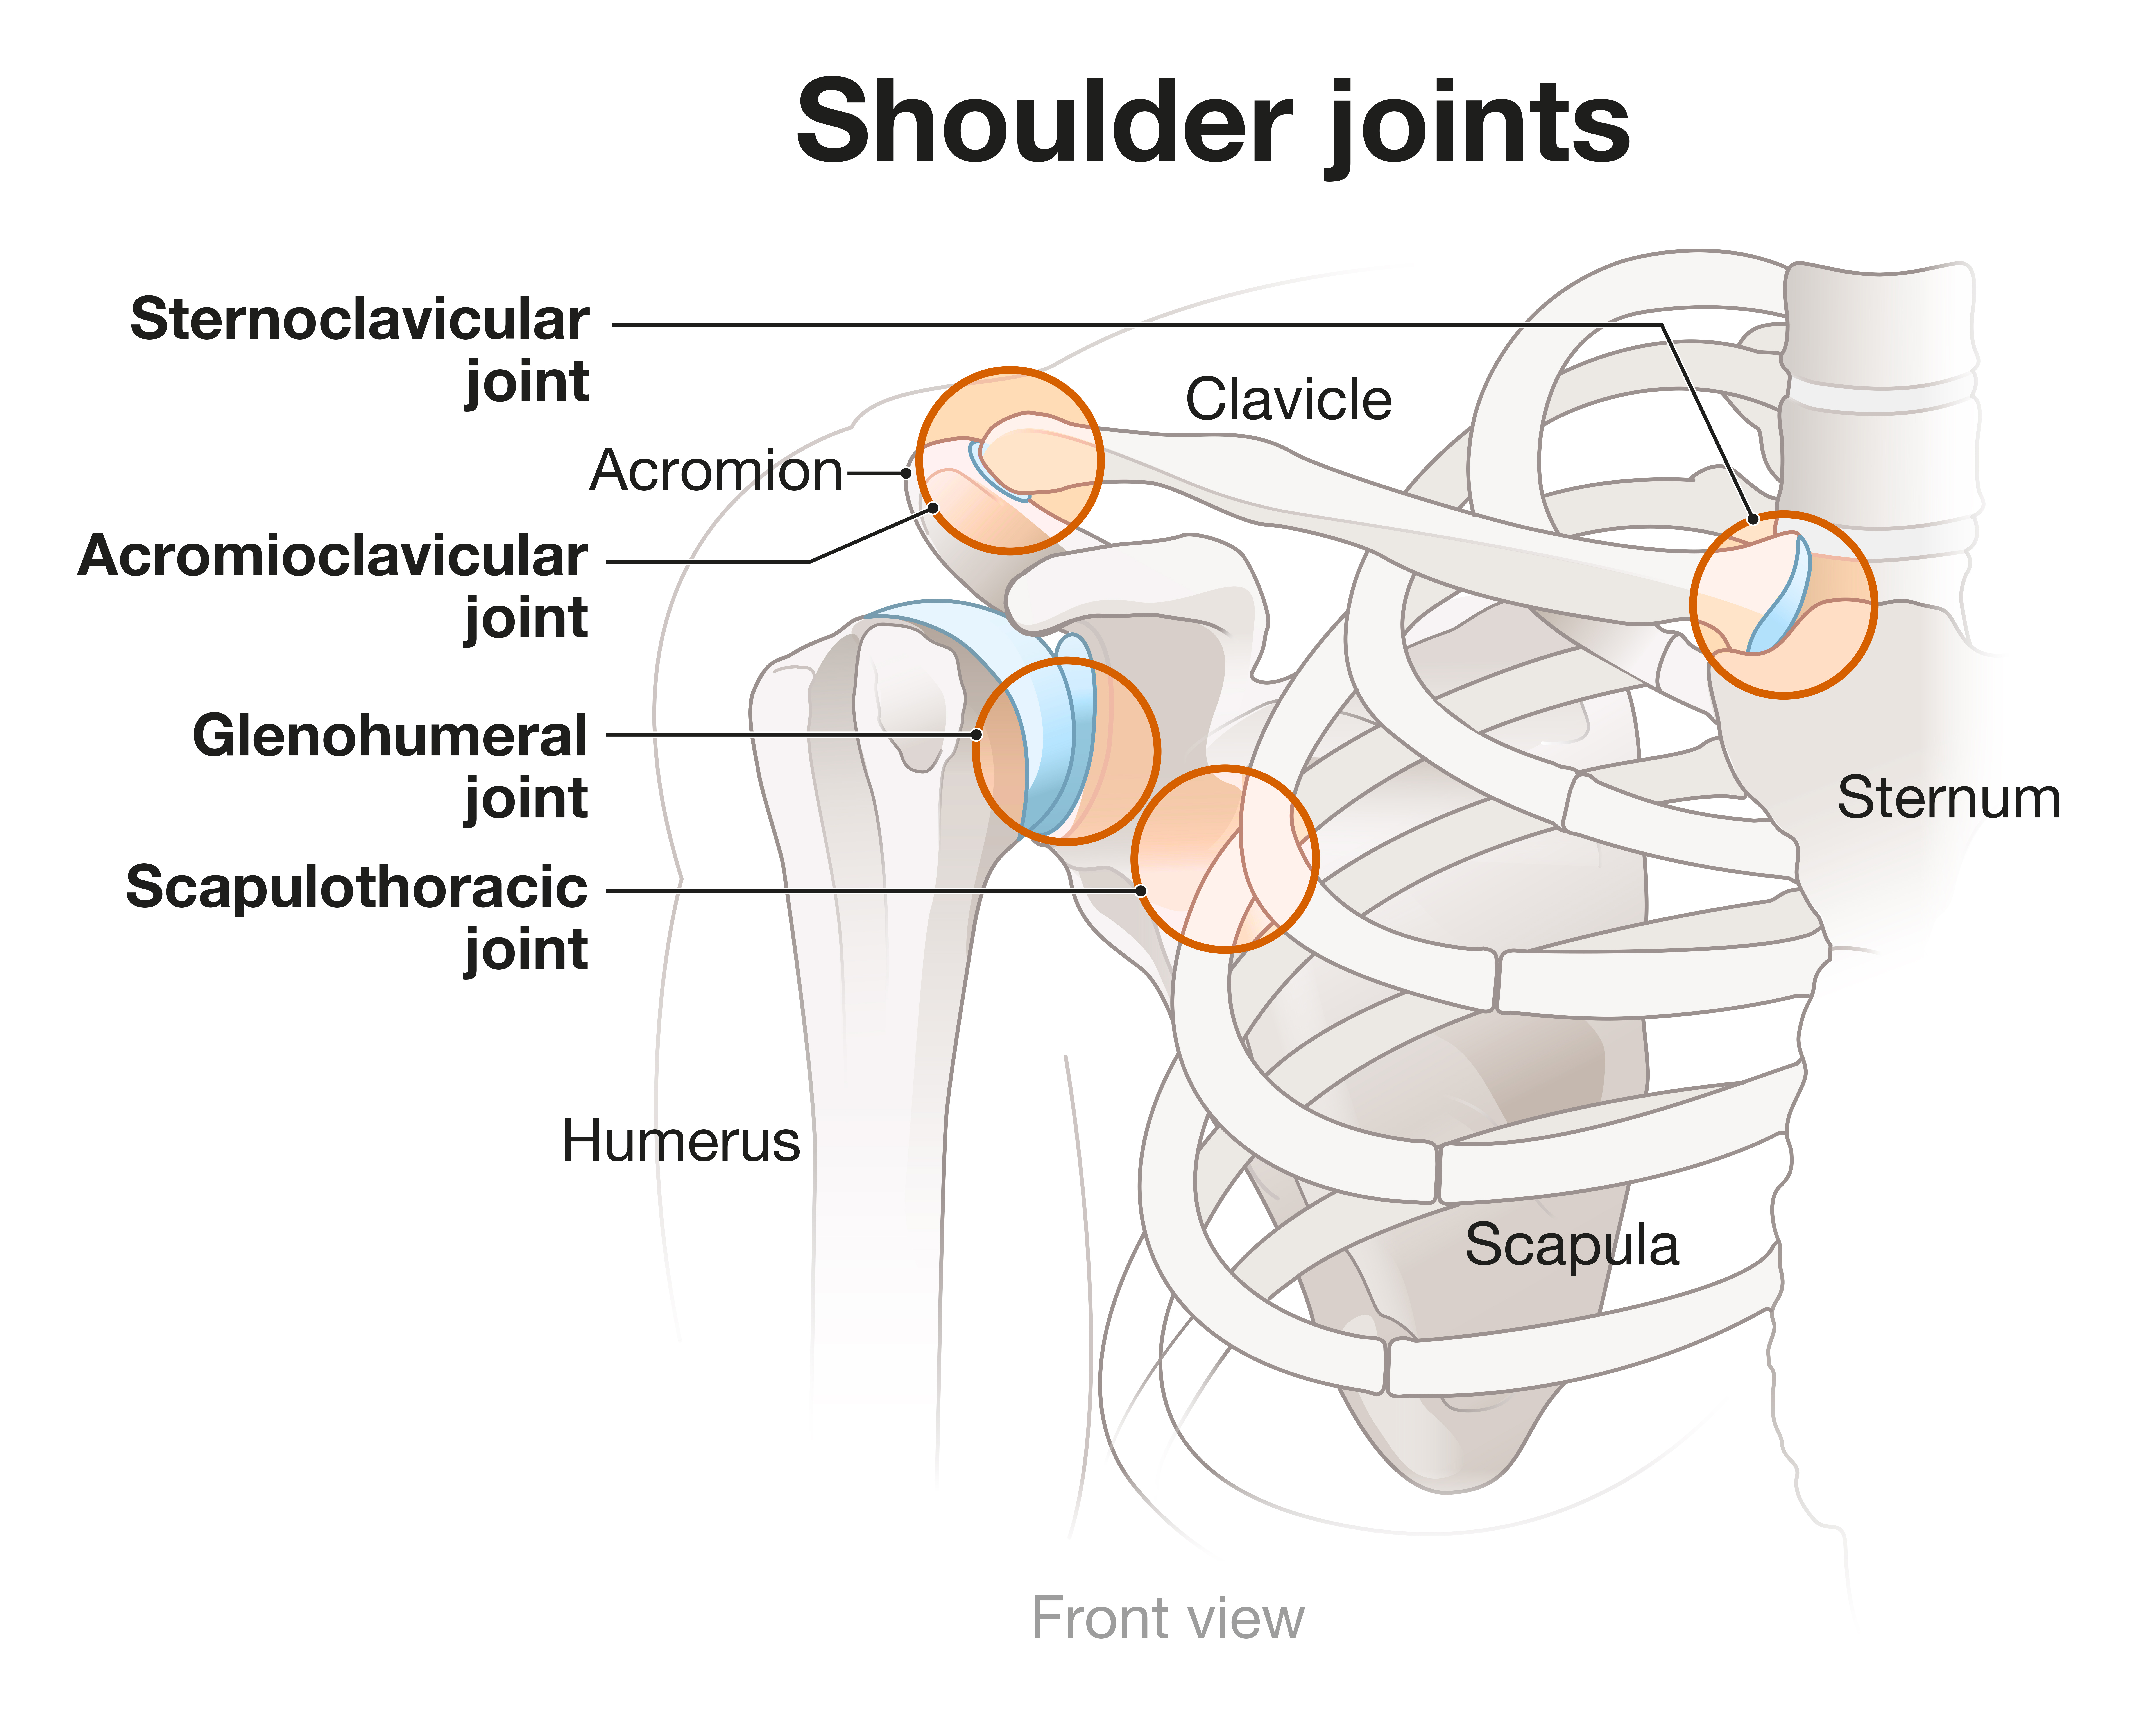 Illustration showing the shoulder anatomy and the acromioclavicular (AC) joint.